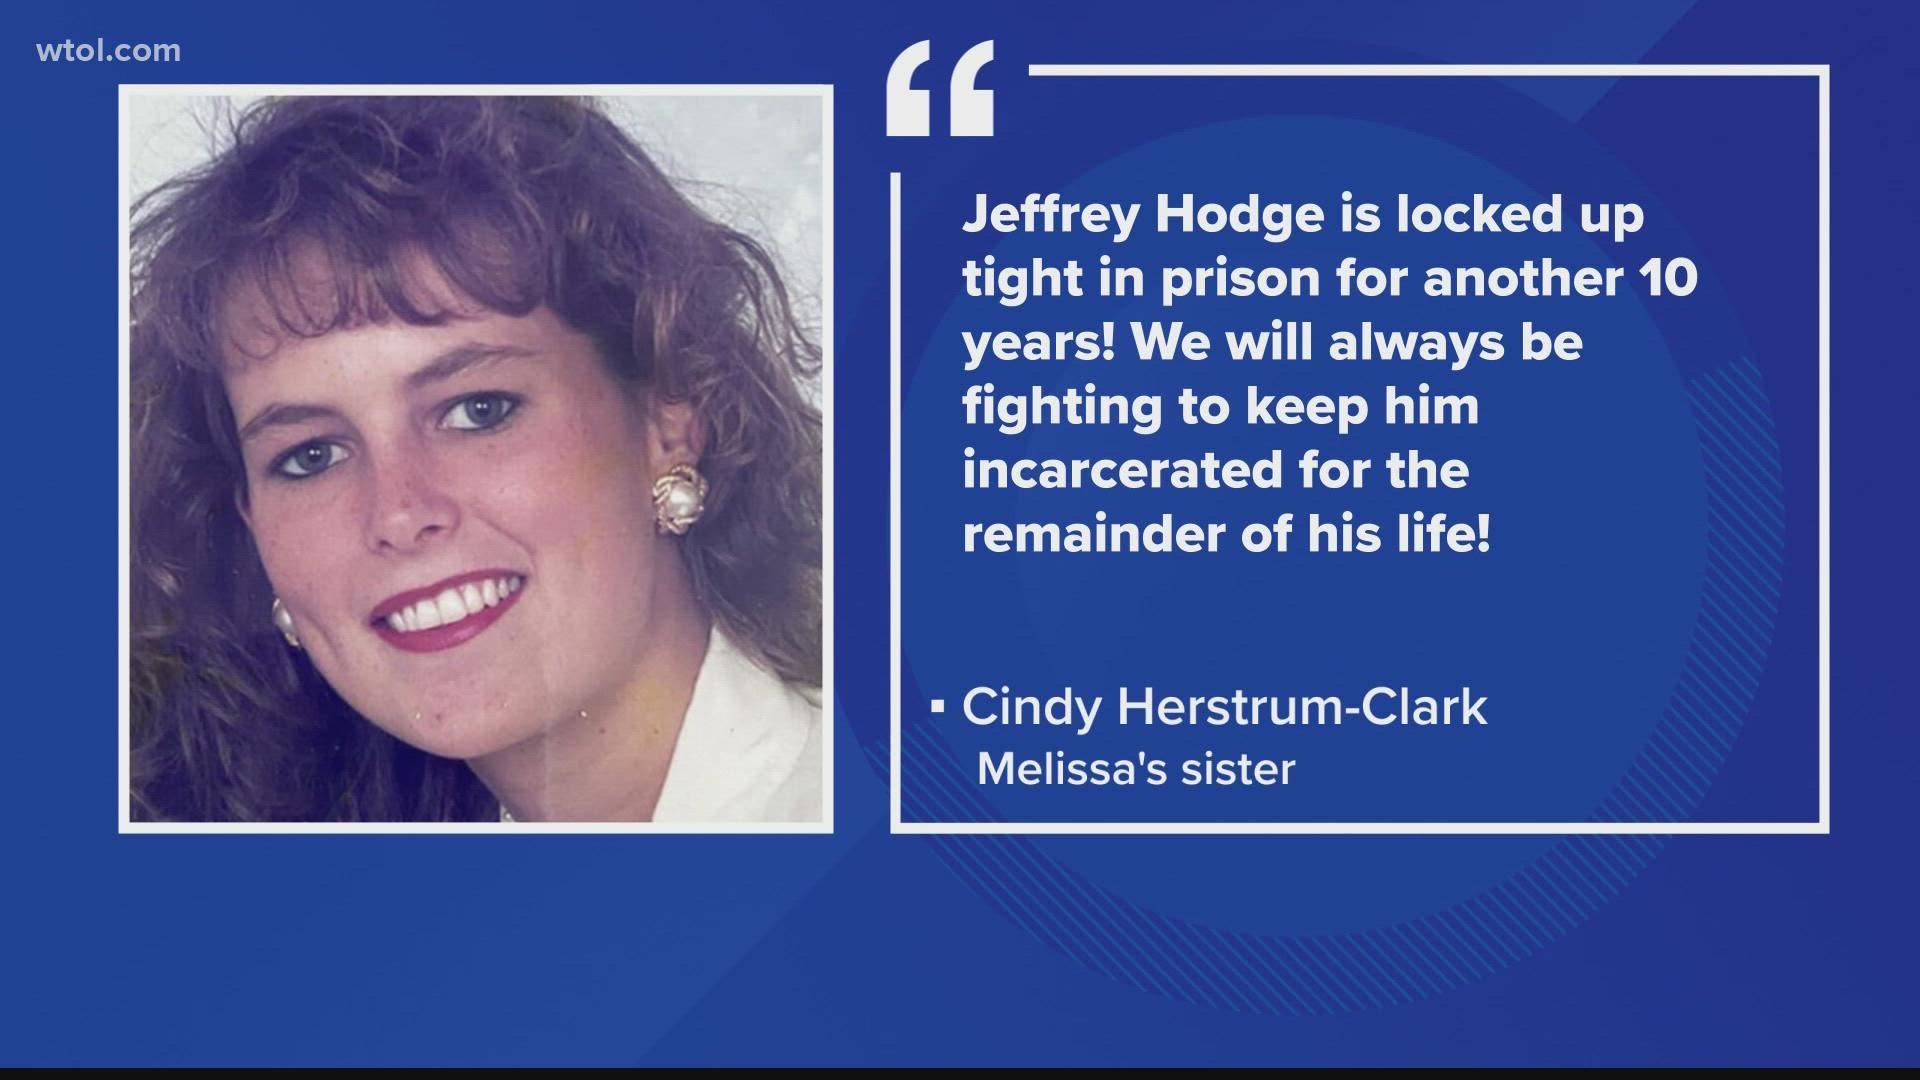 Jeffery Hodge pleaded guilty to the murder of 19-year-old Melissa Herstrum in 1993.